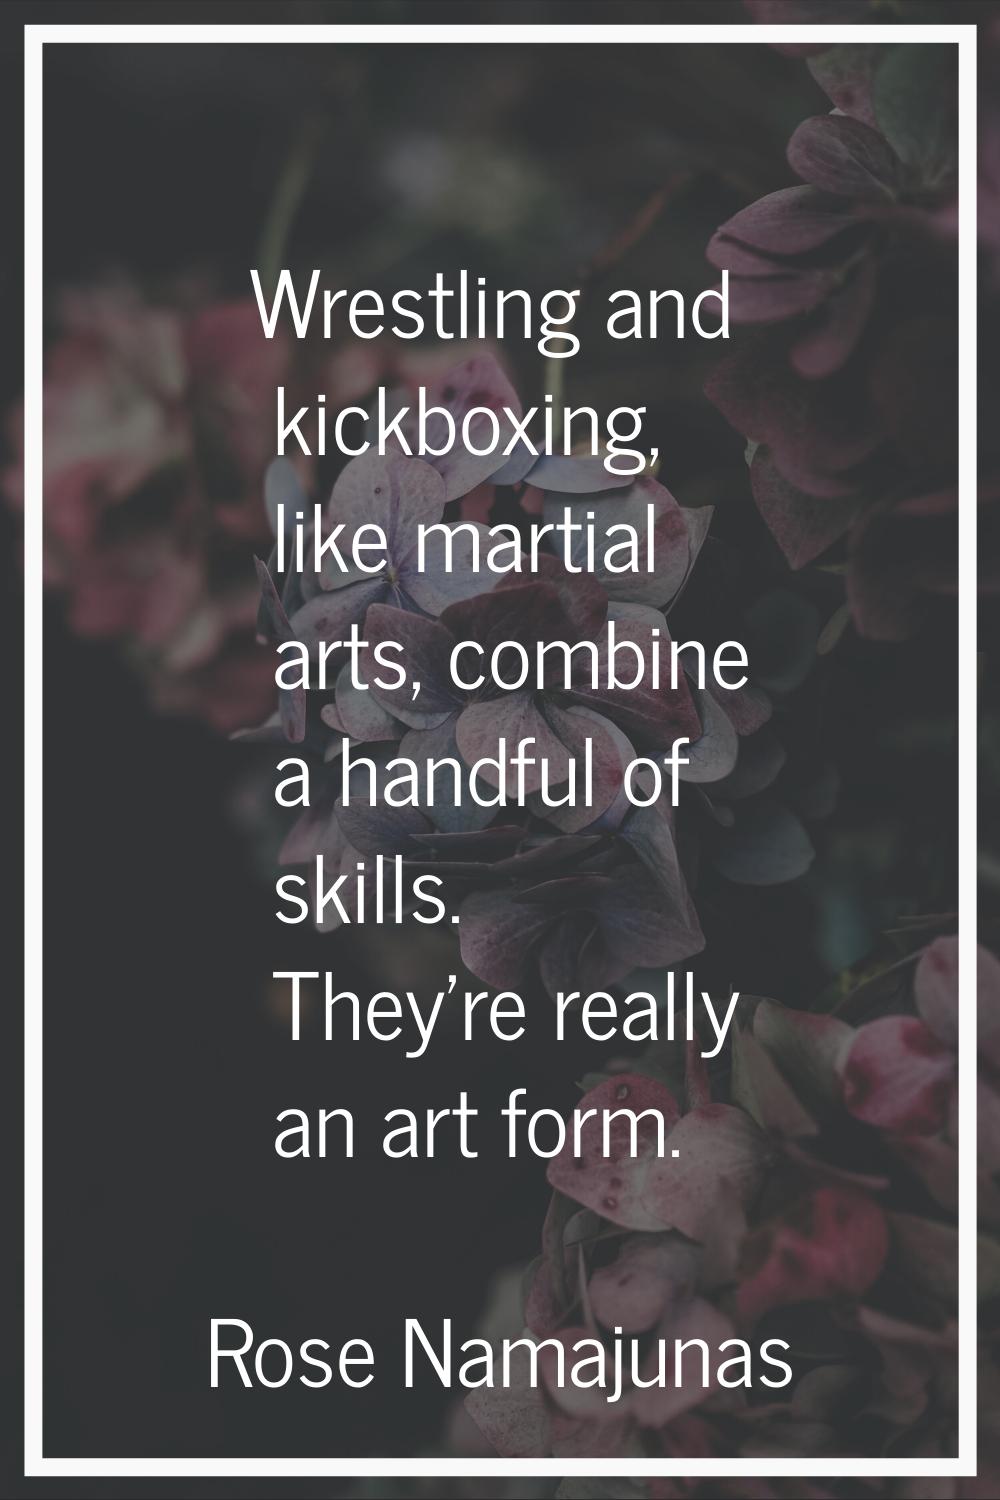 Wrestling and kickboxing, like martial arts, combine a handful of skills. They're really an art for